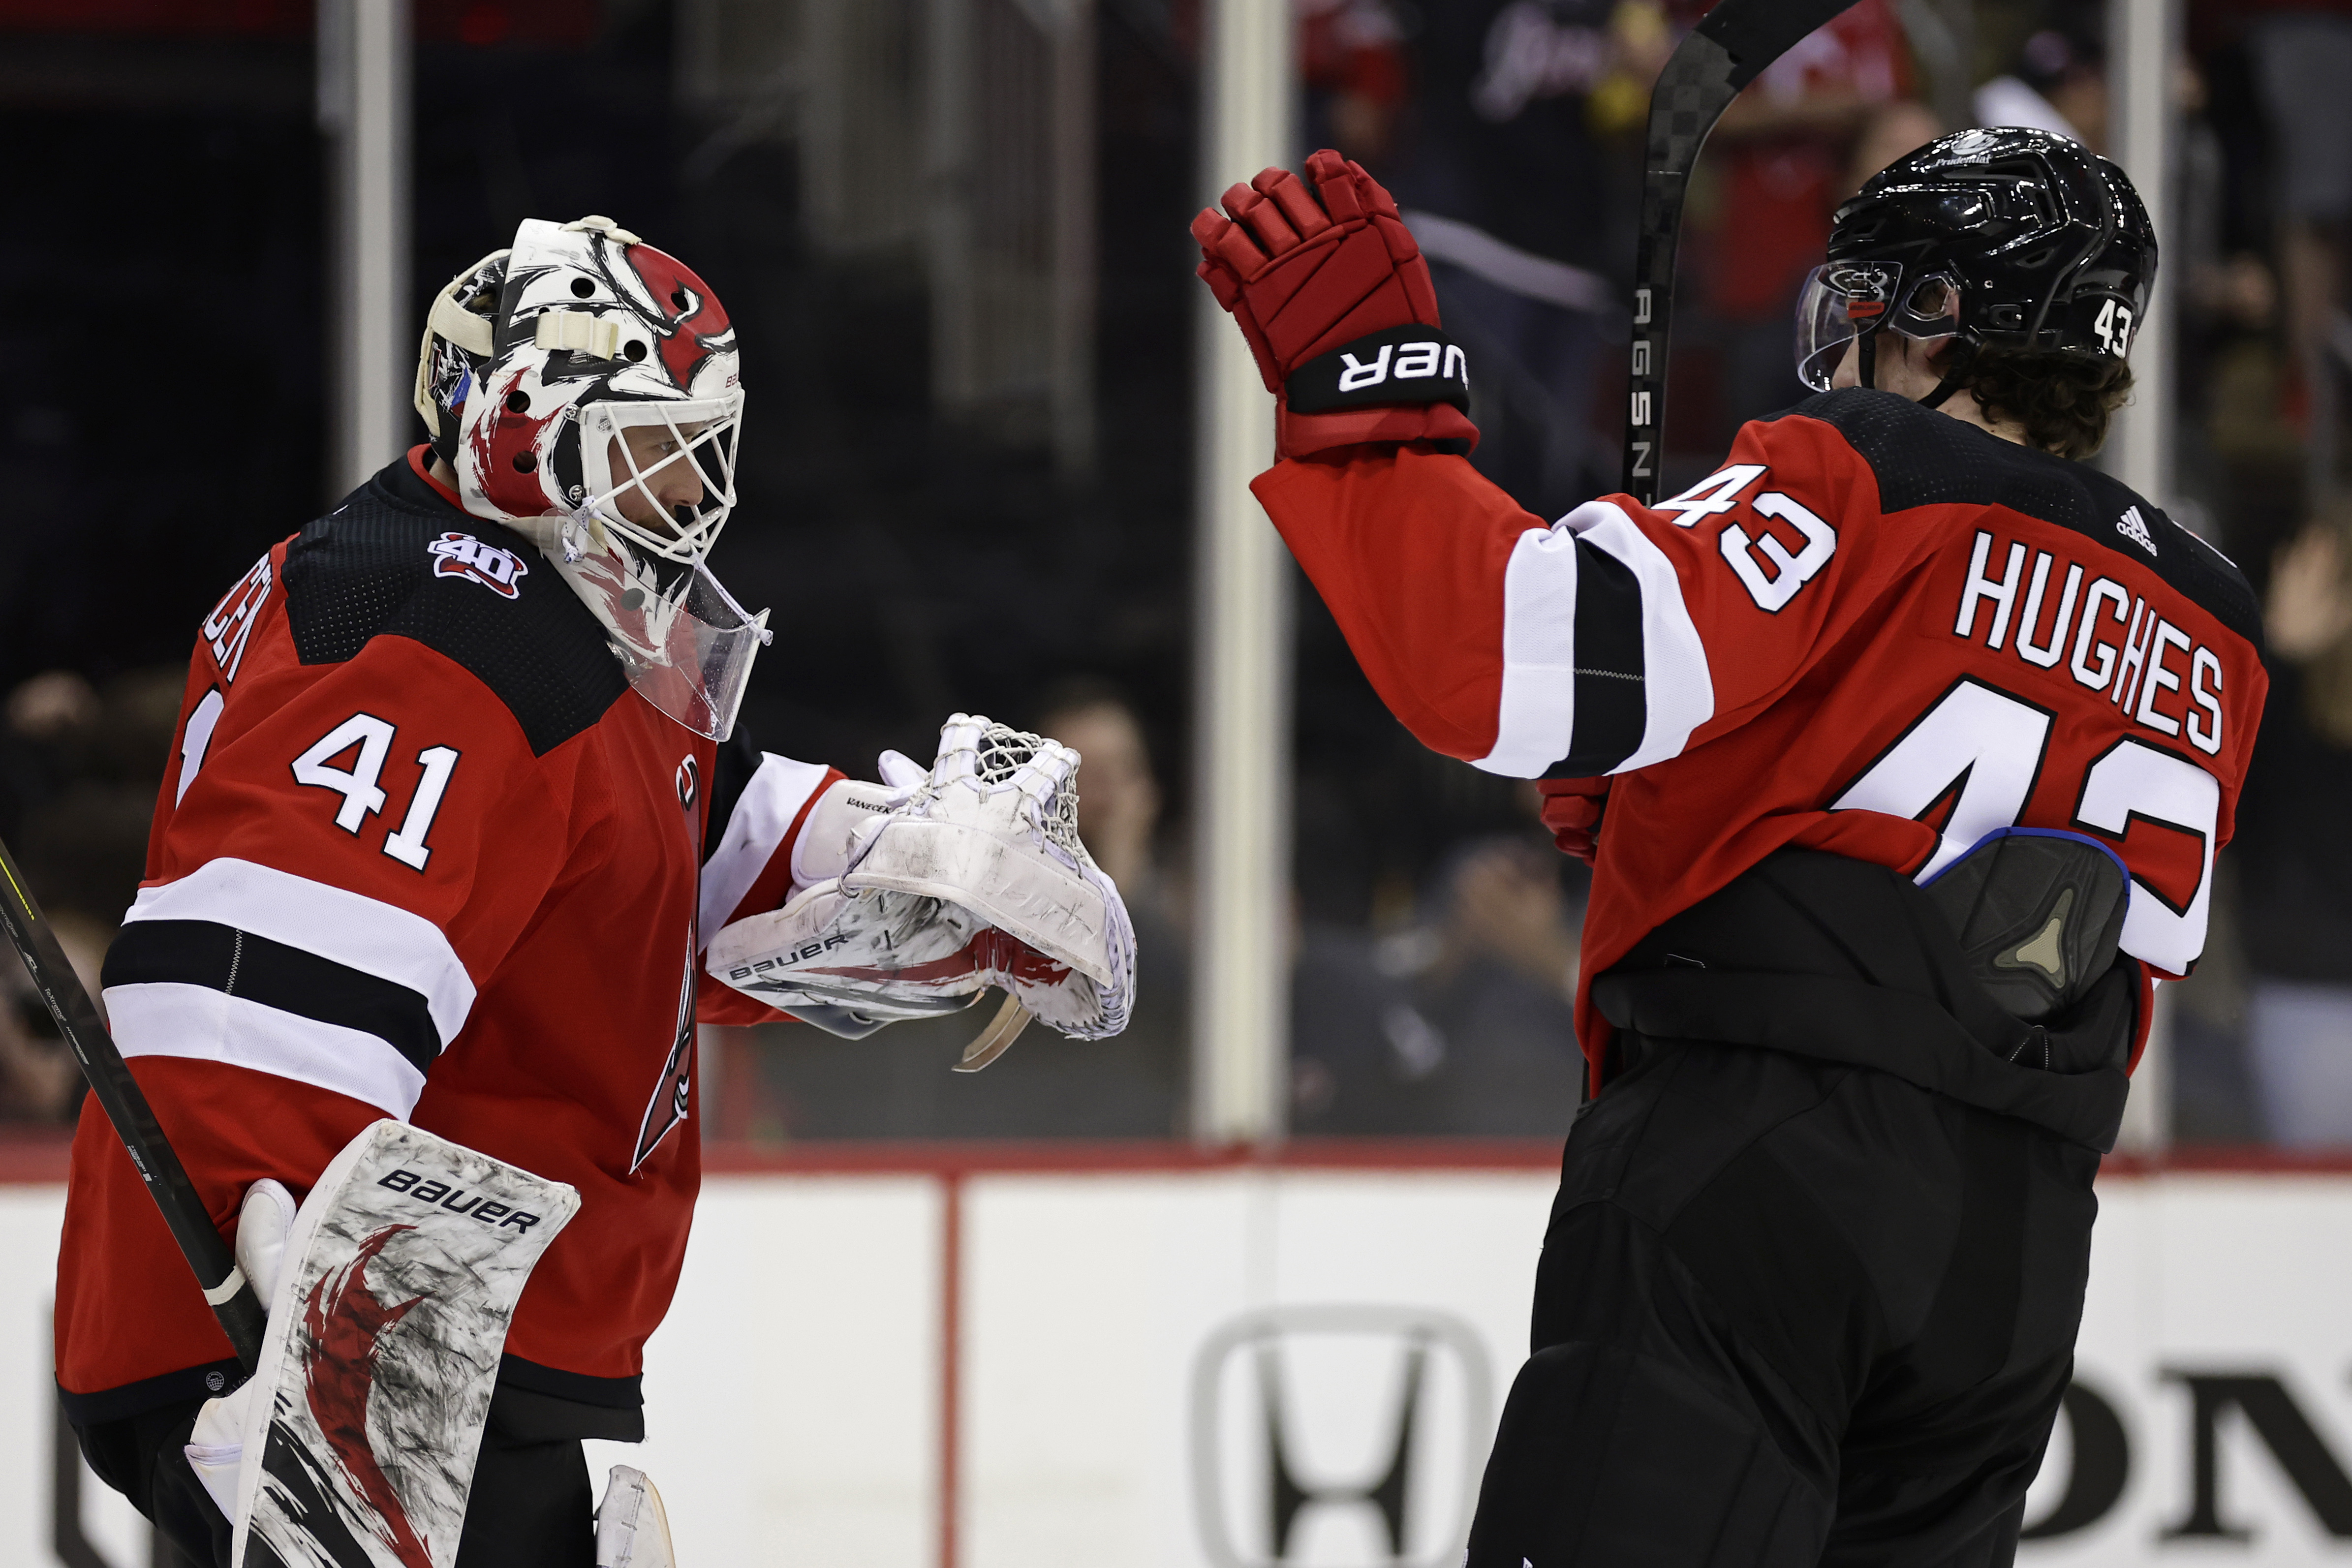 Devils answer in Game 3, rout Canes 8-4